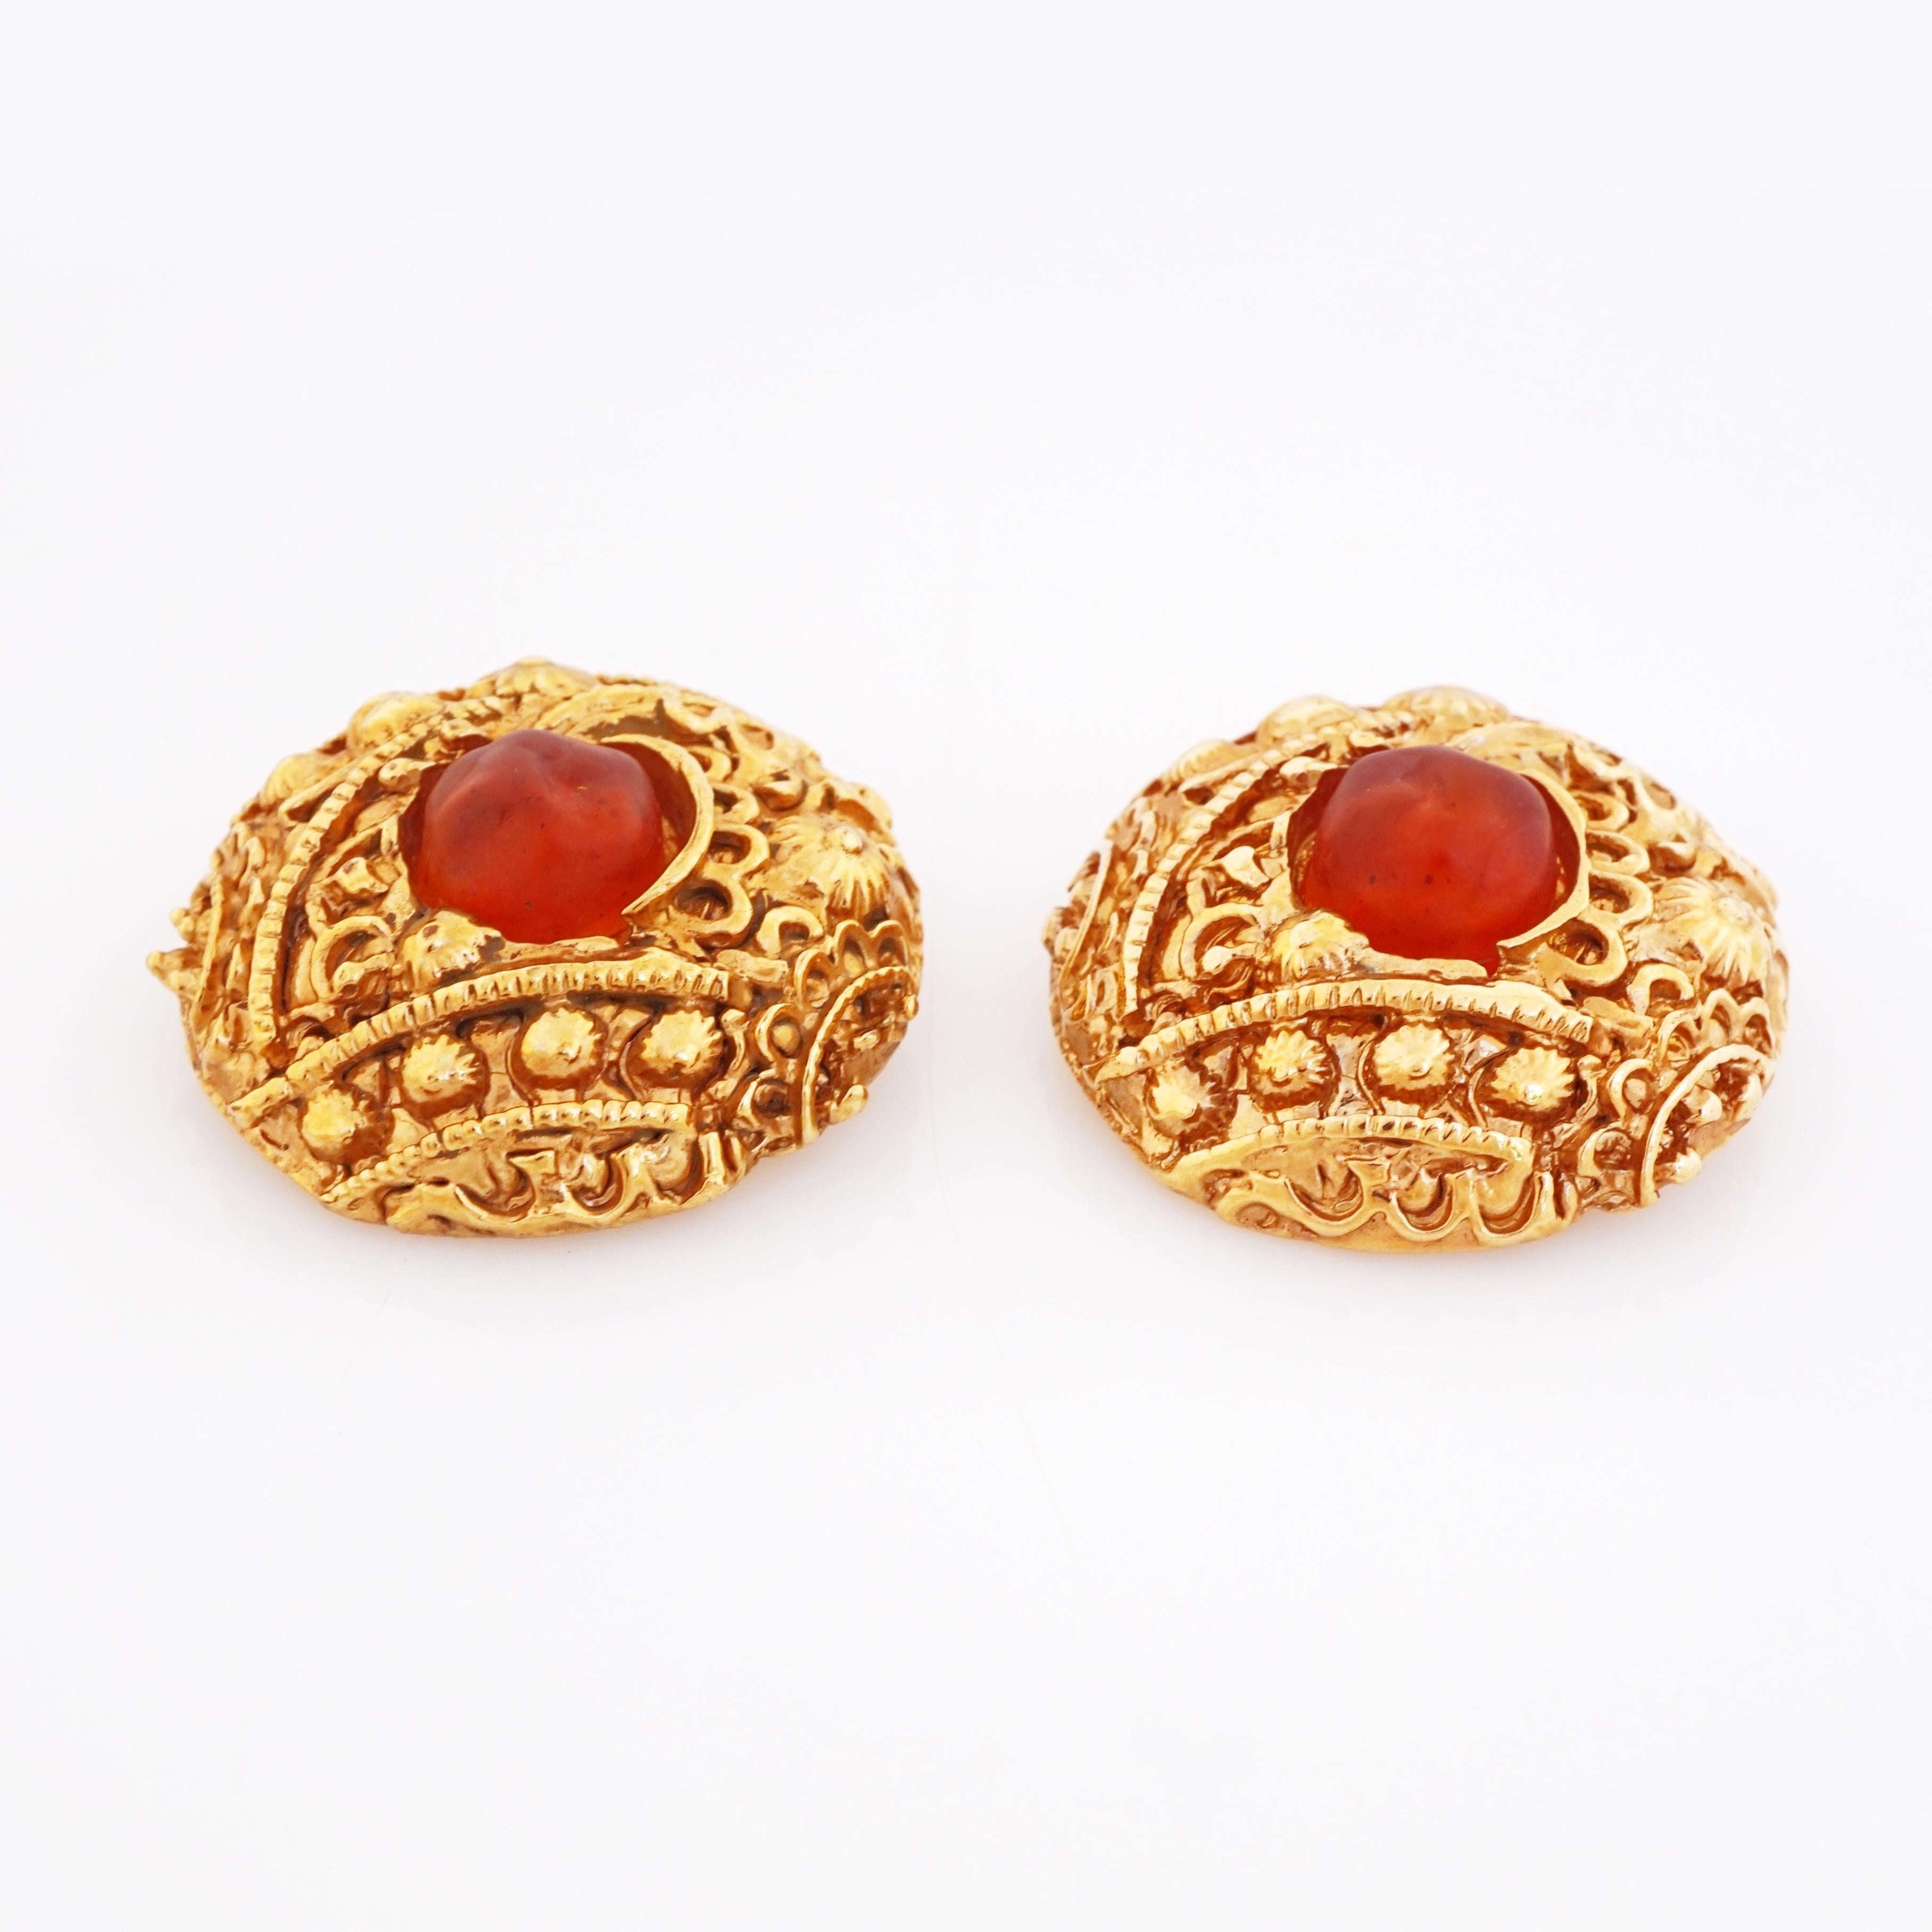 Modern Textured Gilt Statement Earrings With Amber Cabochons By Alexis Lahellec, 1980s For Sale